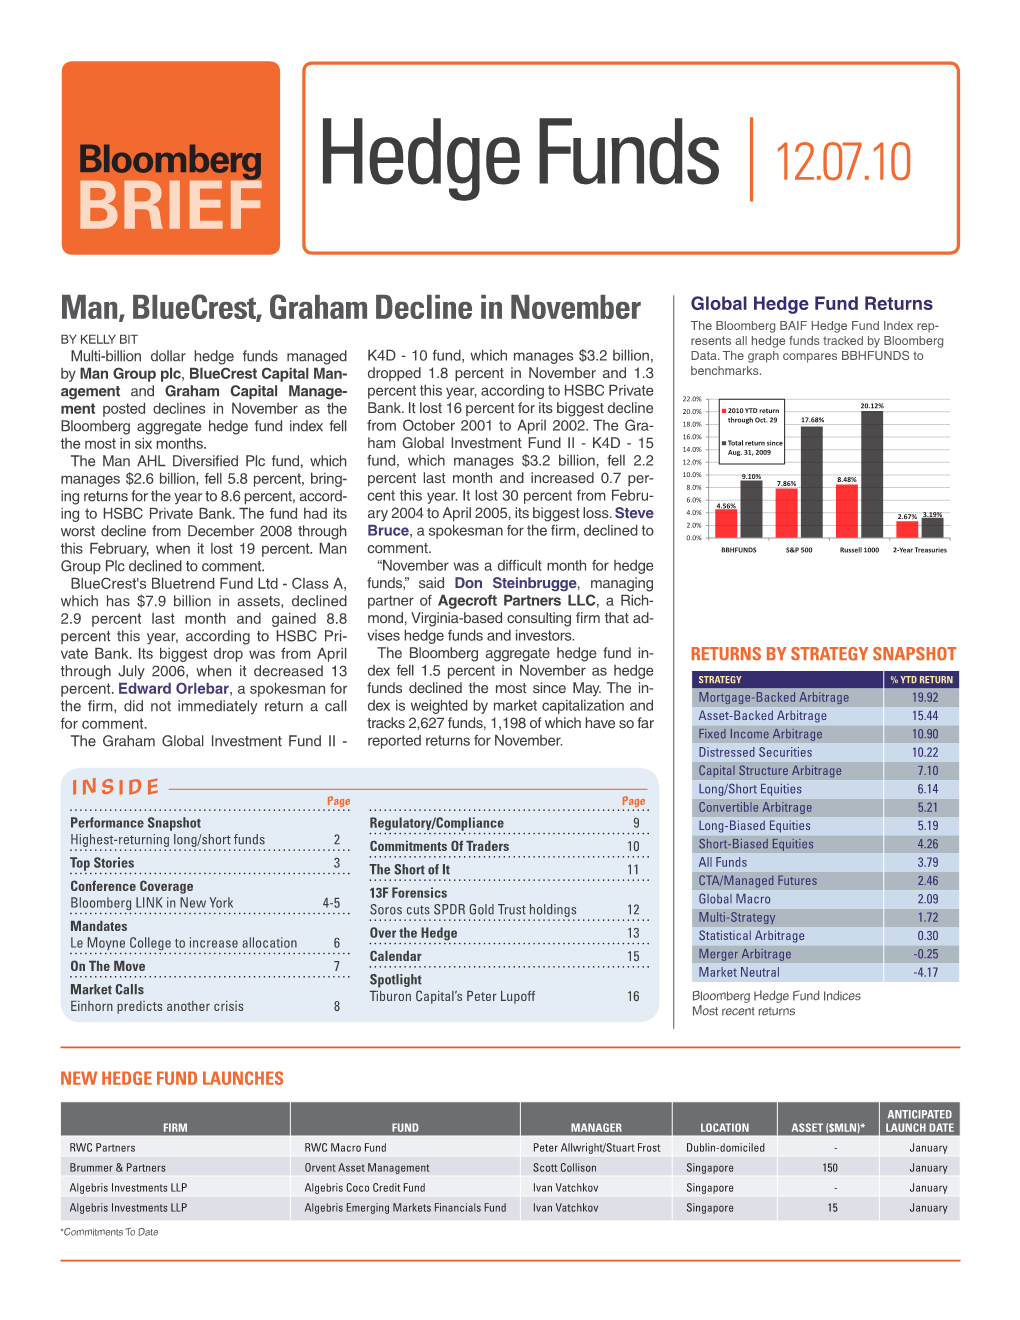 Bloomberg Hedge Funds 12.07.10 BRIEF